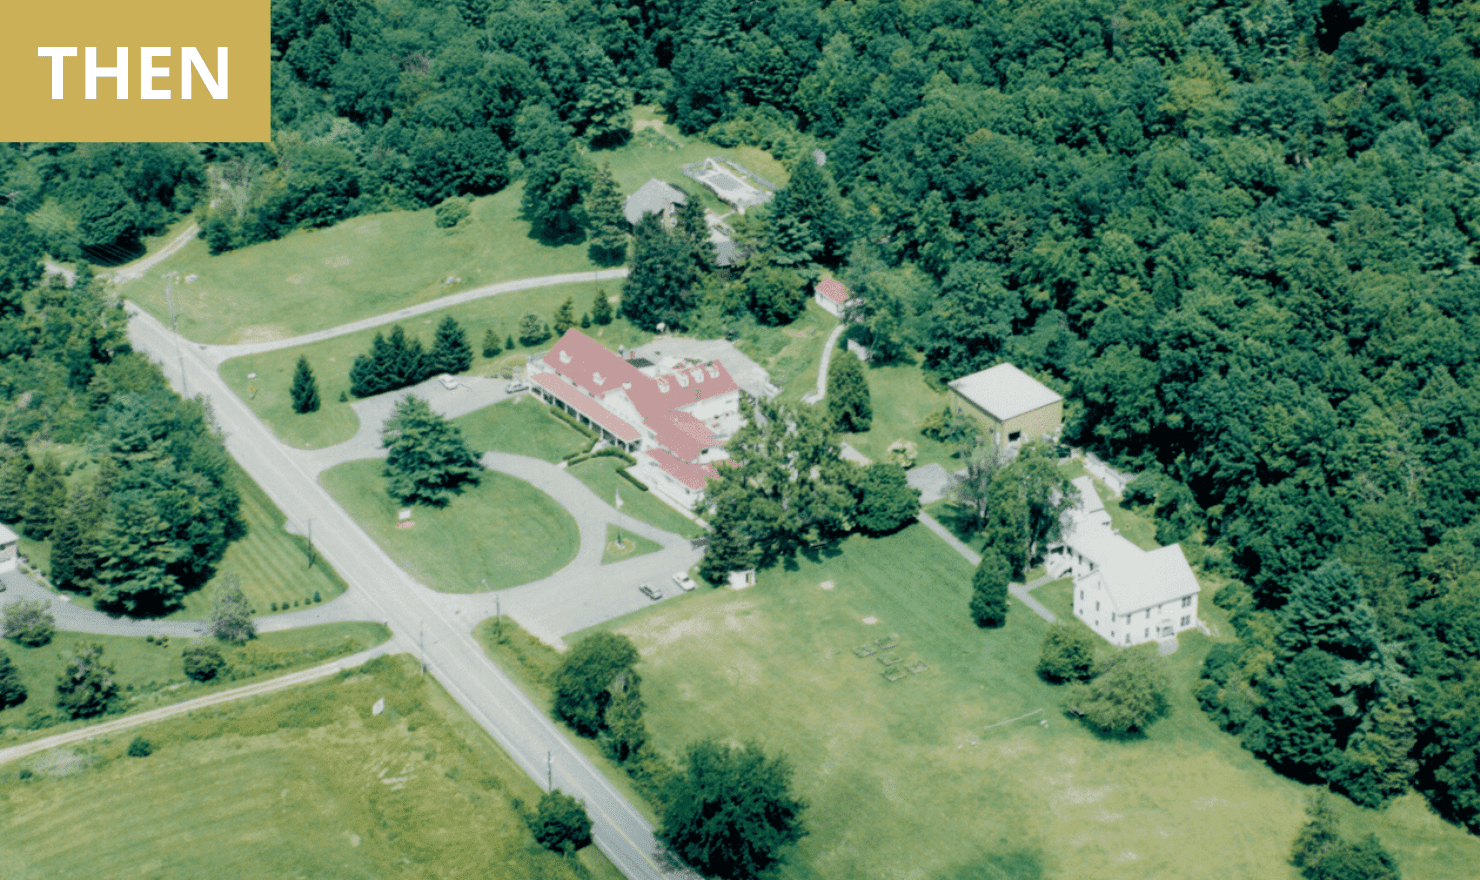 THEN: An aerial view of the Mountainside main campus in Canaan, CT